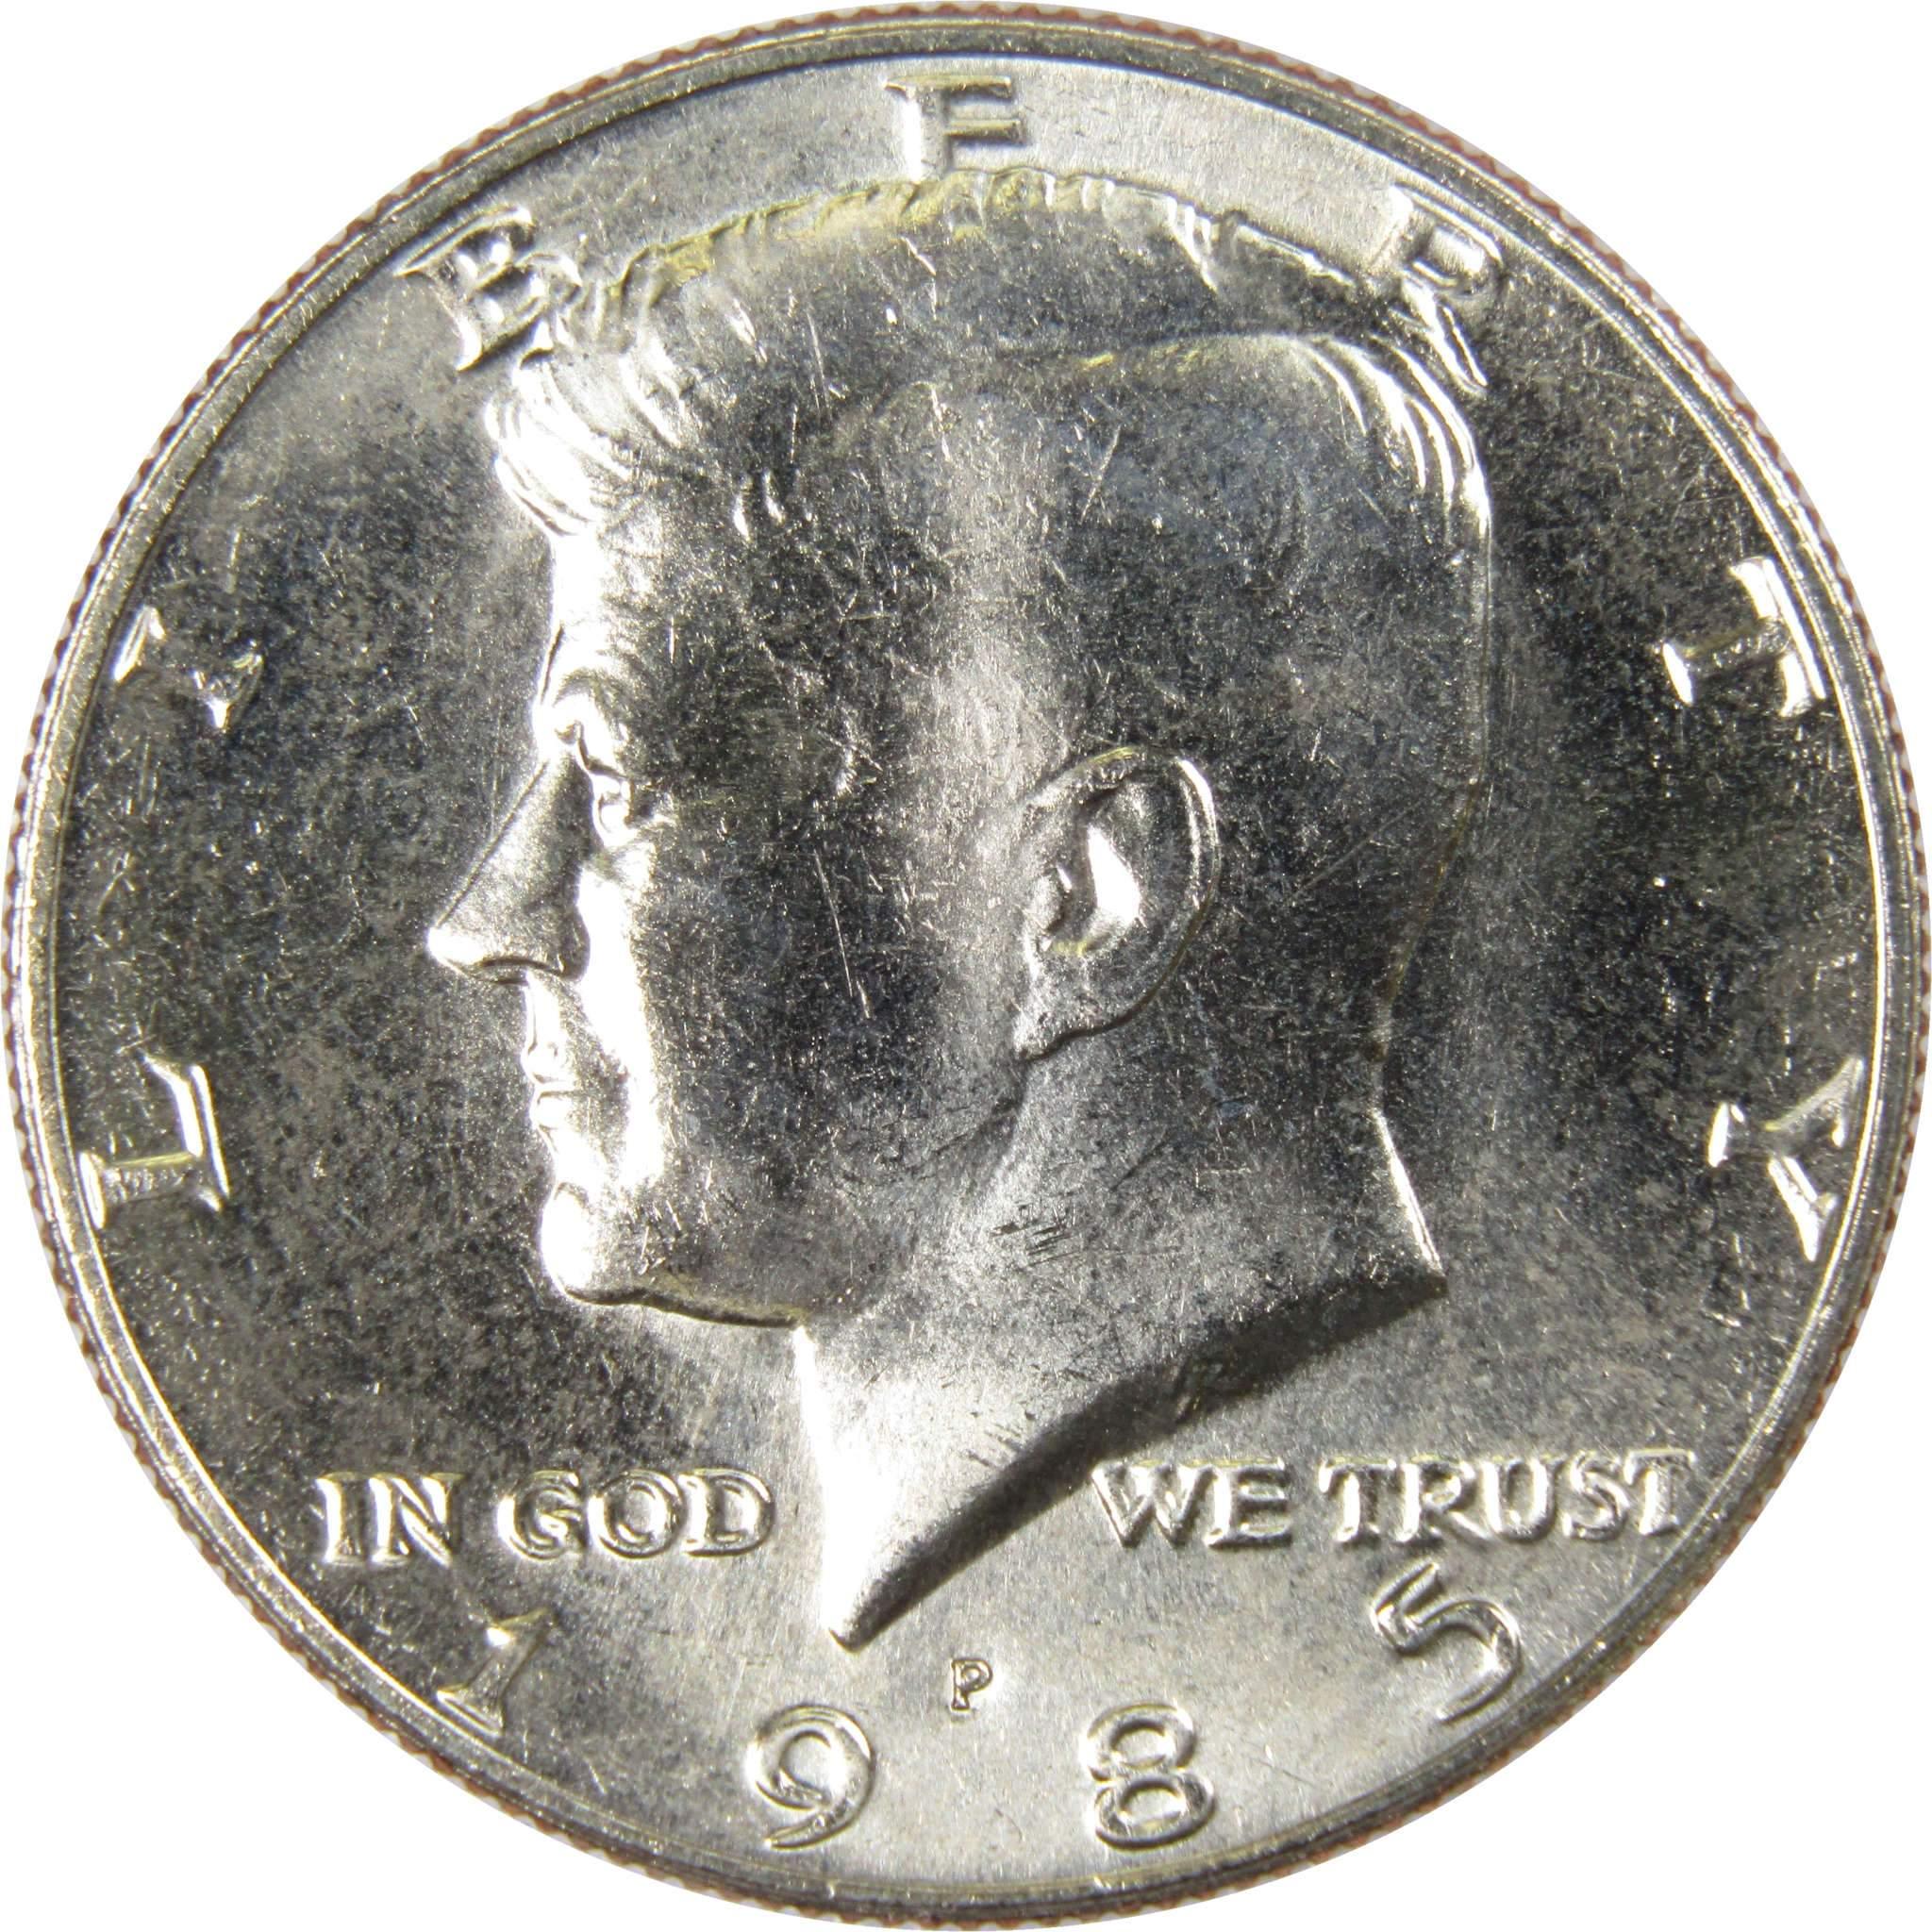 1985 P Kennedy Half Dollar BU Uncirculated Mint State 50c US Coin Collectible